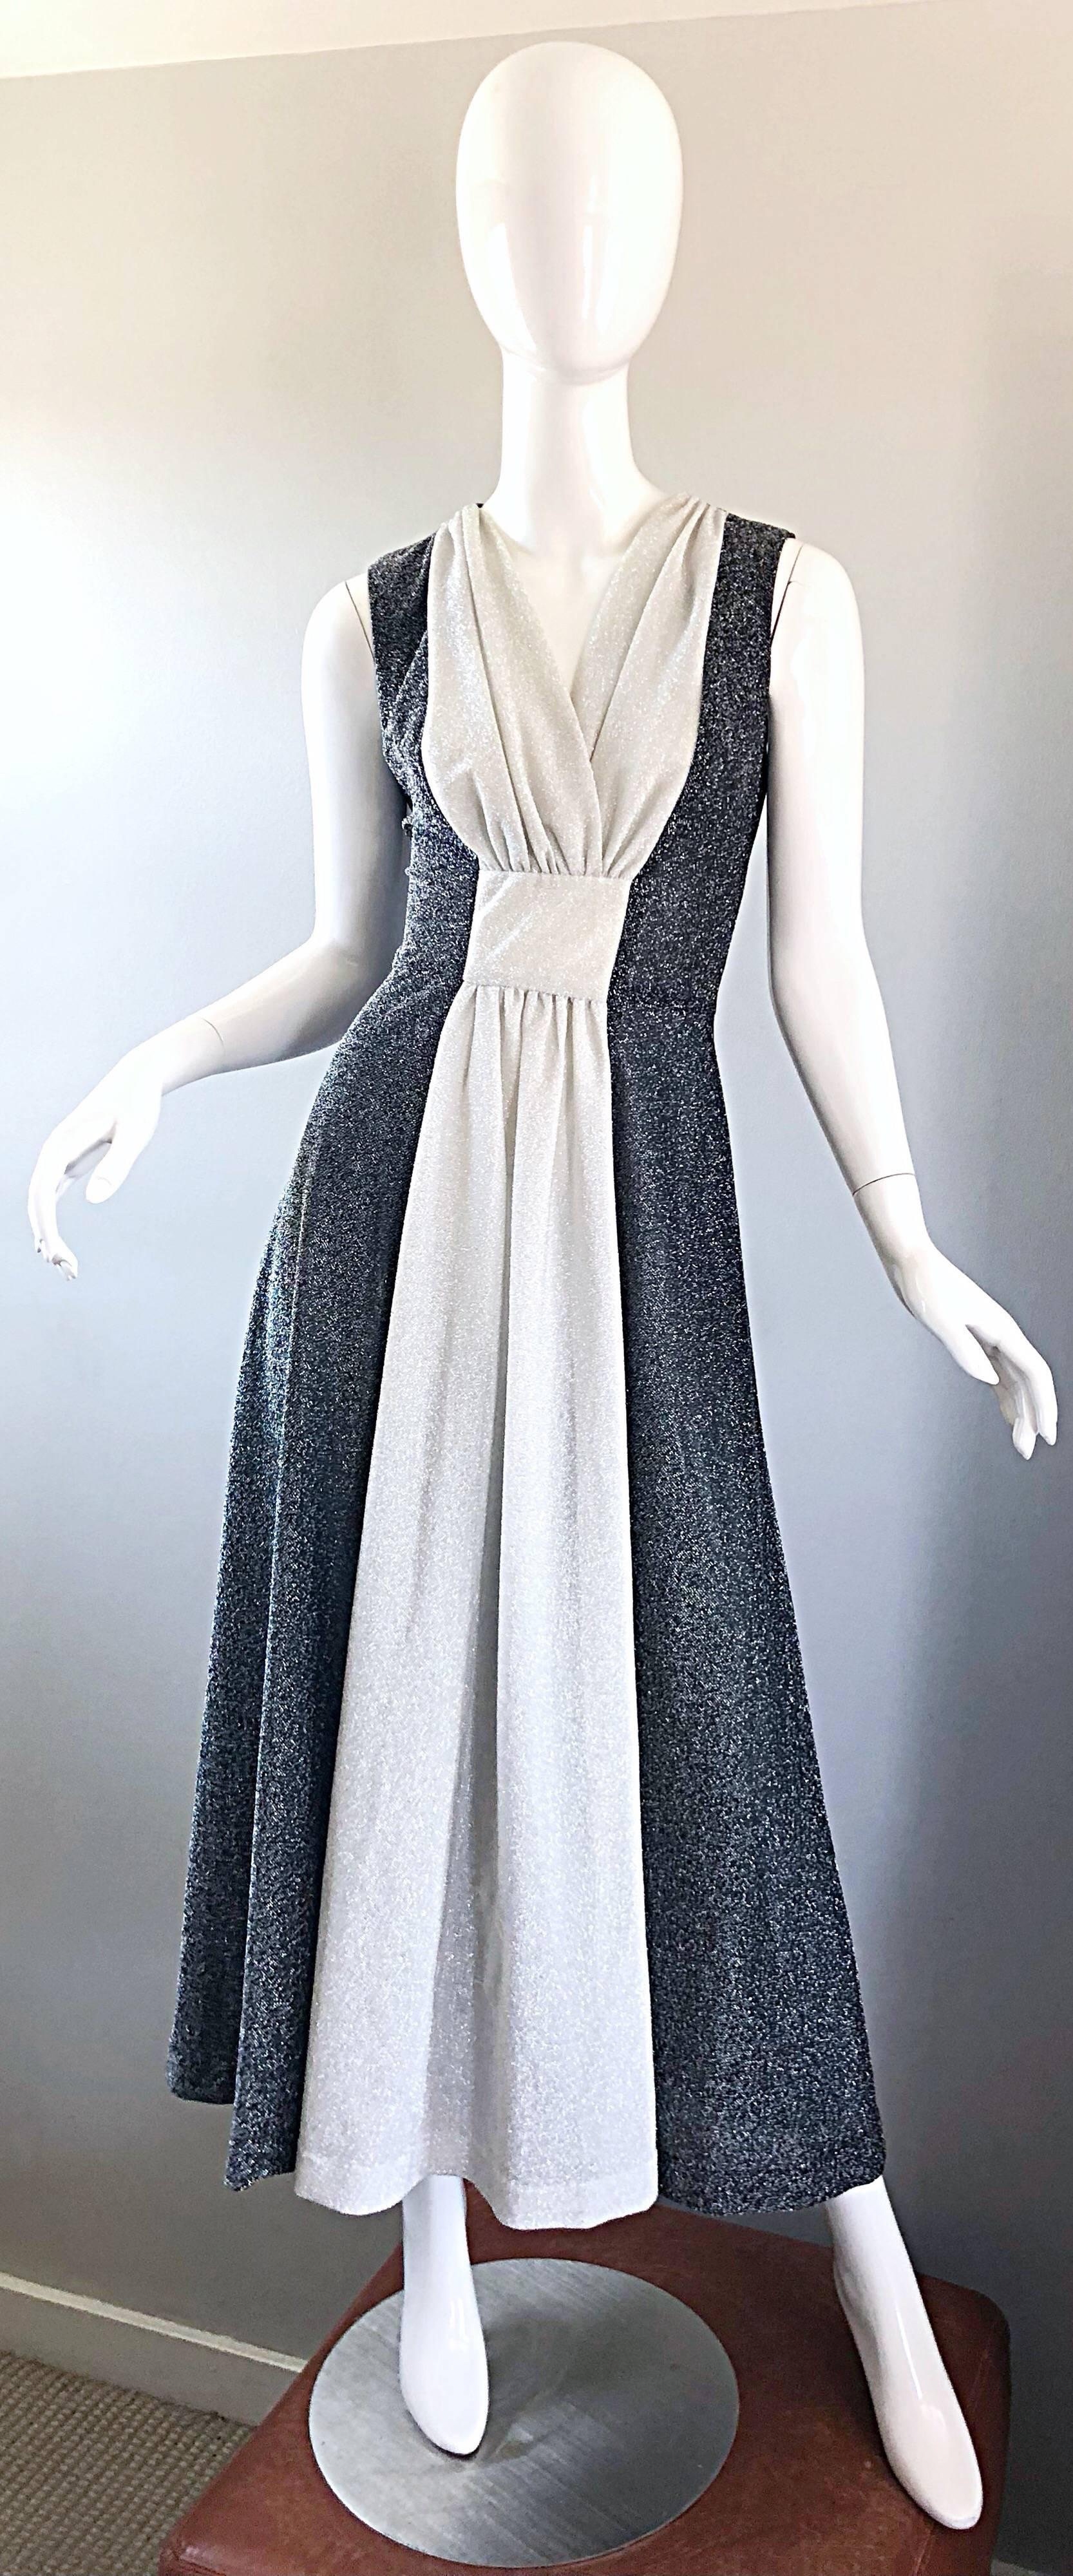 Amazing vintage 1970s gunmetal gray and silver metallic lurex maxi dress / Grecian gown! Features gunmetal metallic color blocking, with a silver metallic panel down the center. Flattering gathering detail at bust and waist. Full metal zipper up the